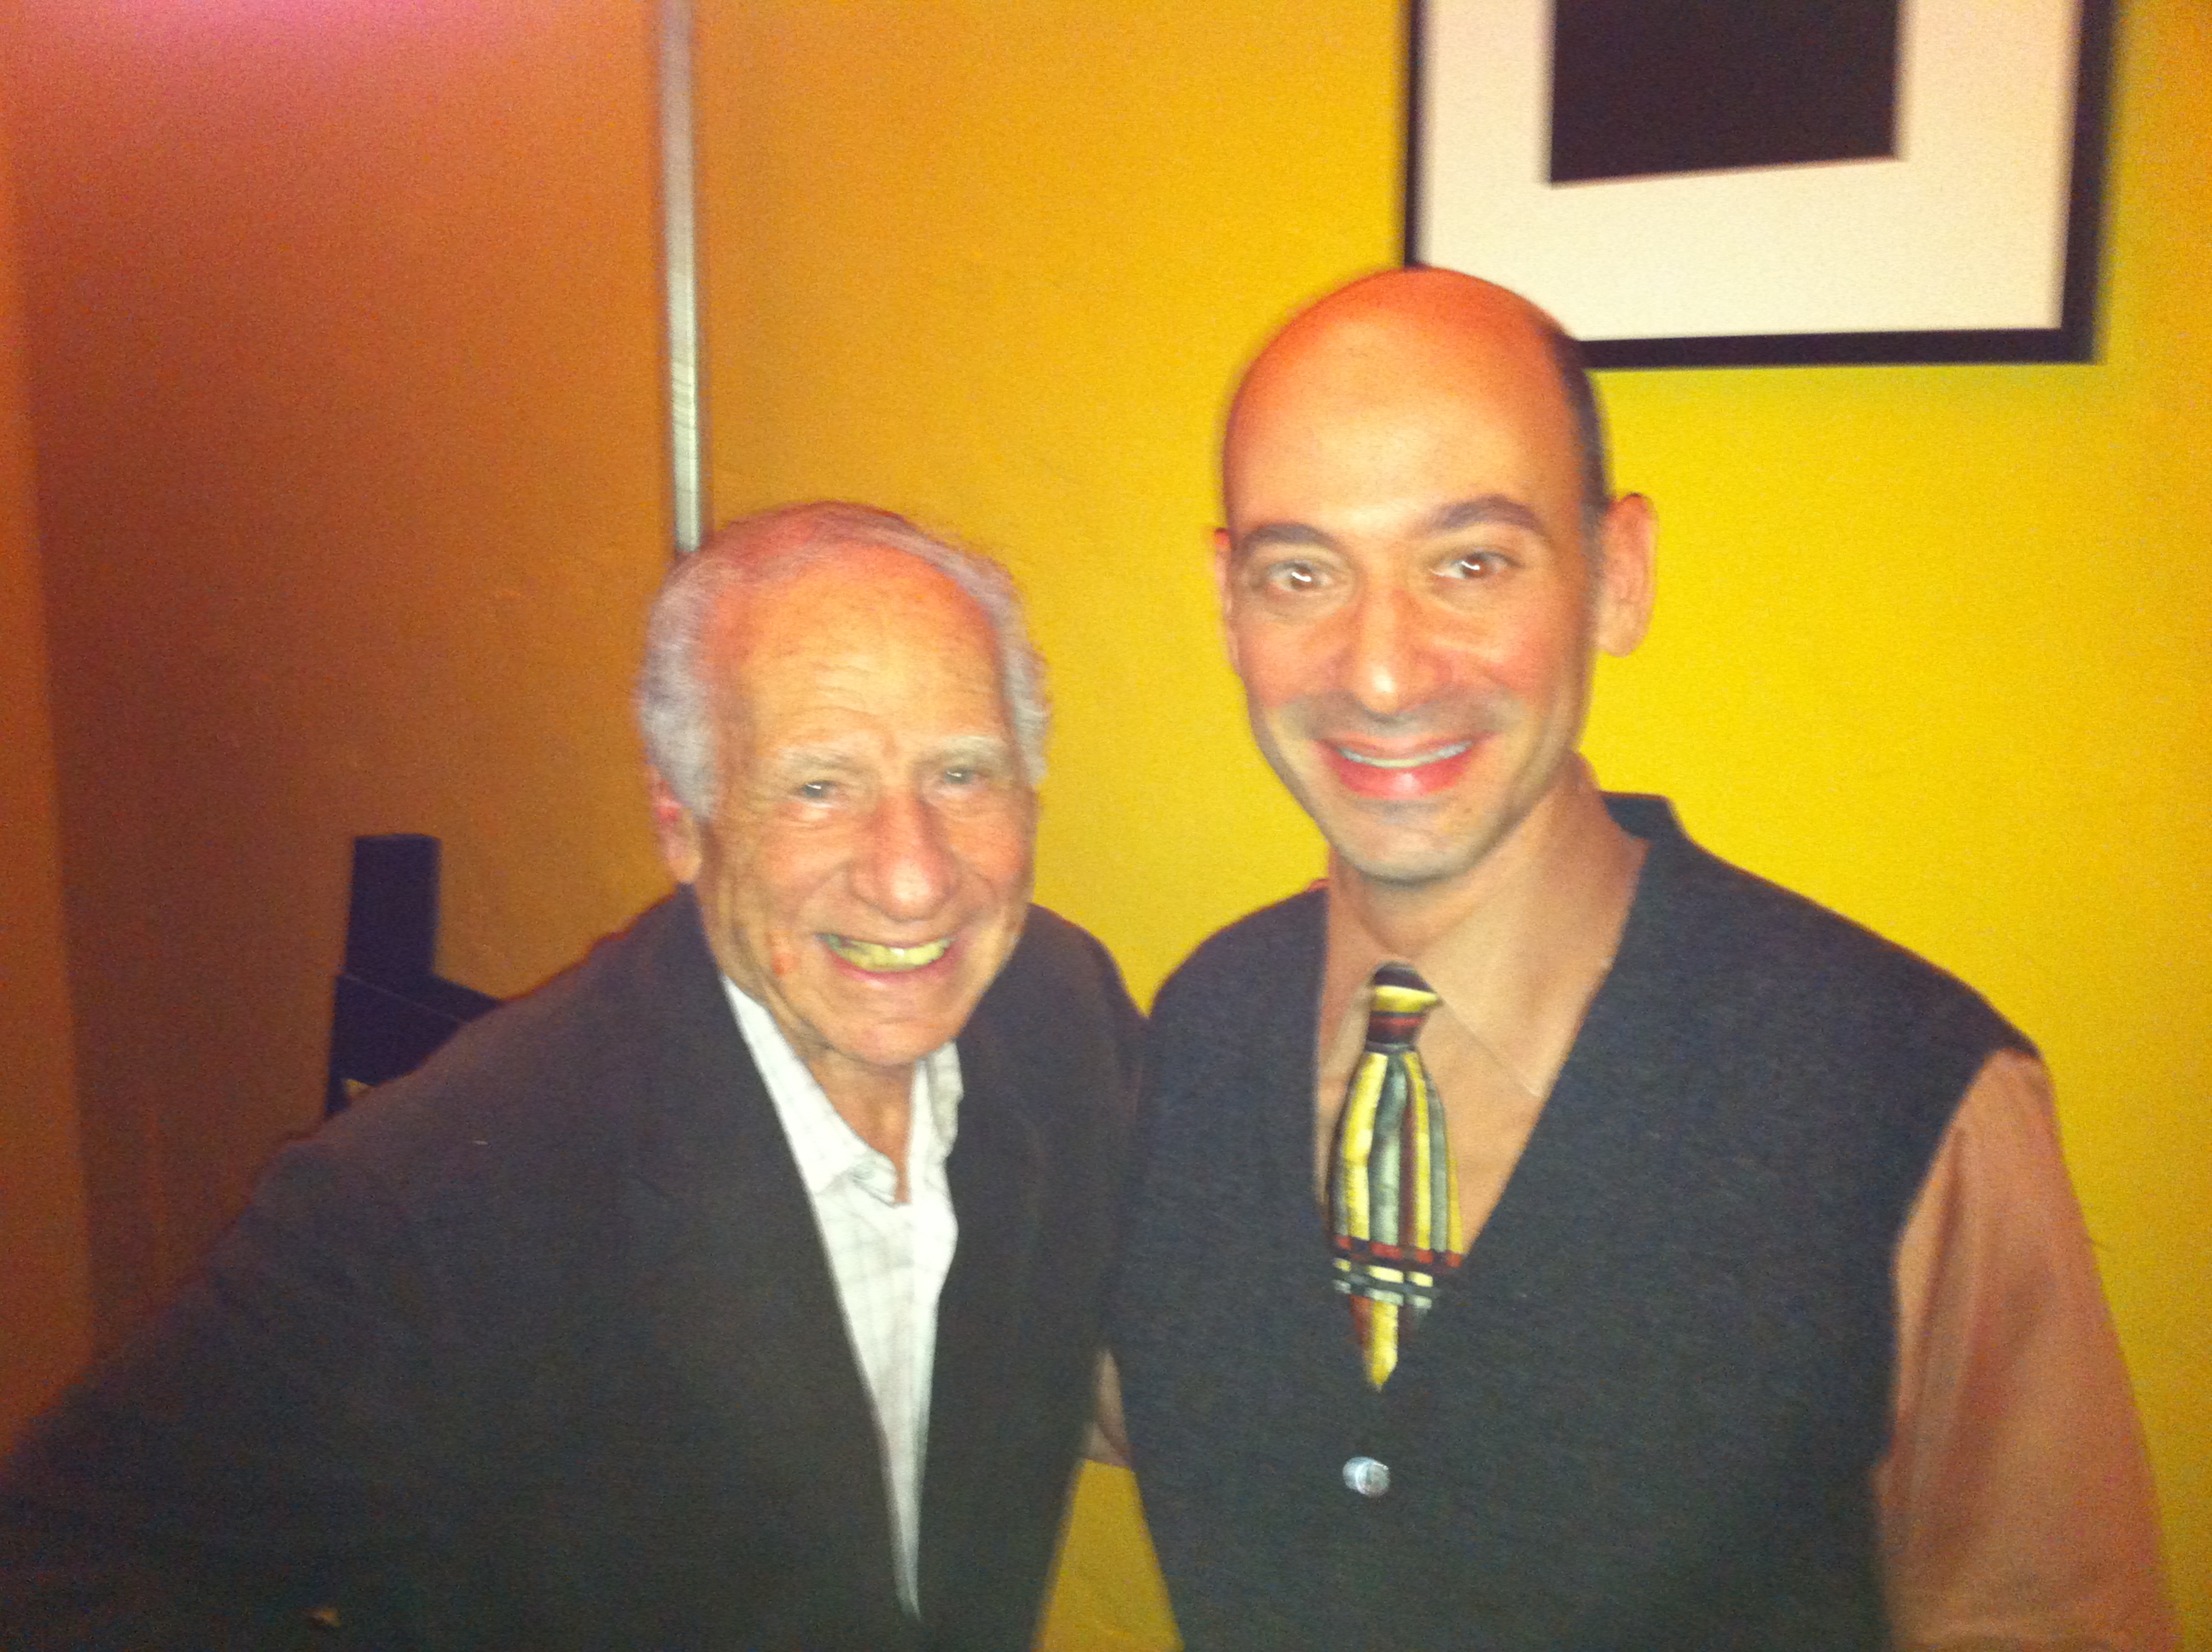 Jeff Blumberg, following his performance in the play Love & Other Allergies, with Mel Brooks